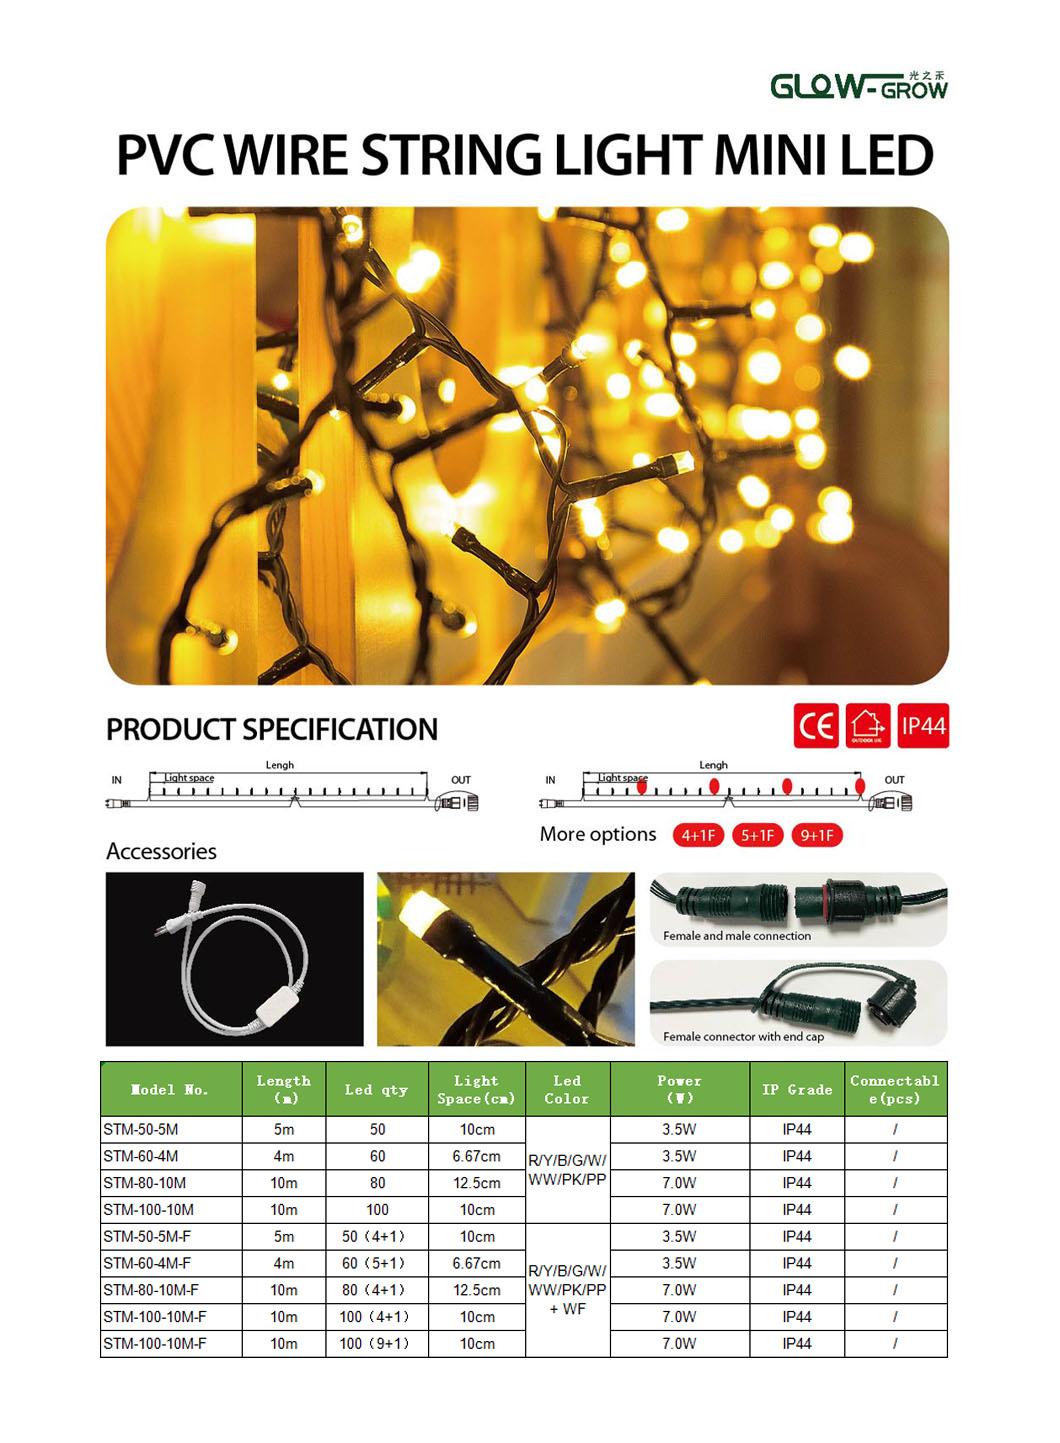 IP44 Waterproof Warm White Christmas Fairy Light Chain LED Solar Patio String Light for Event Home Xmas Garden Tree Wedding Decoration